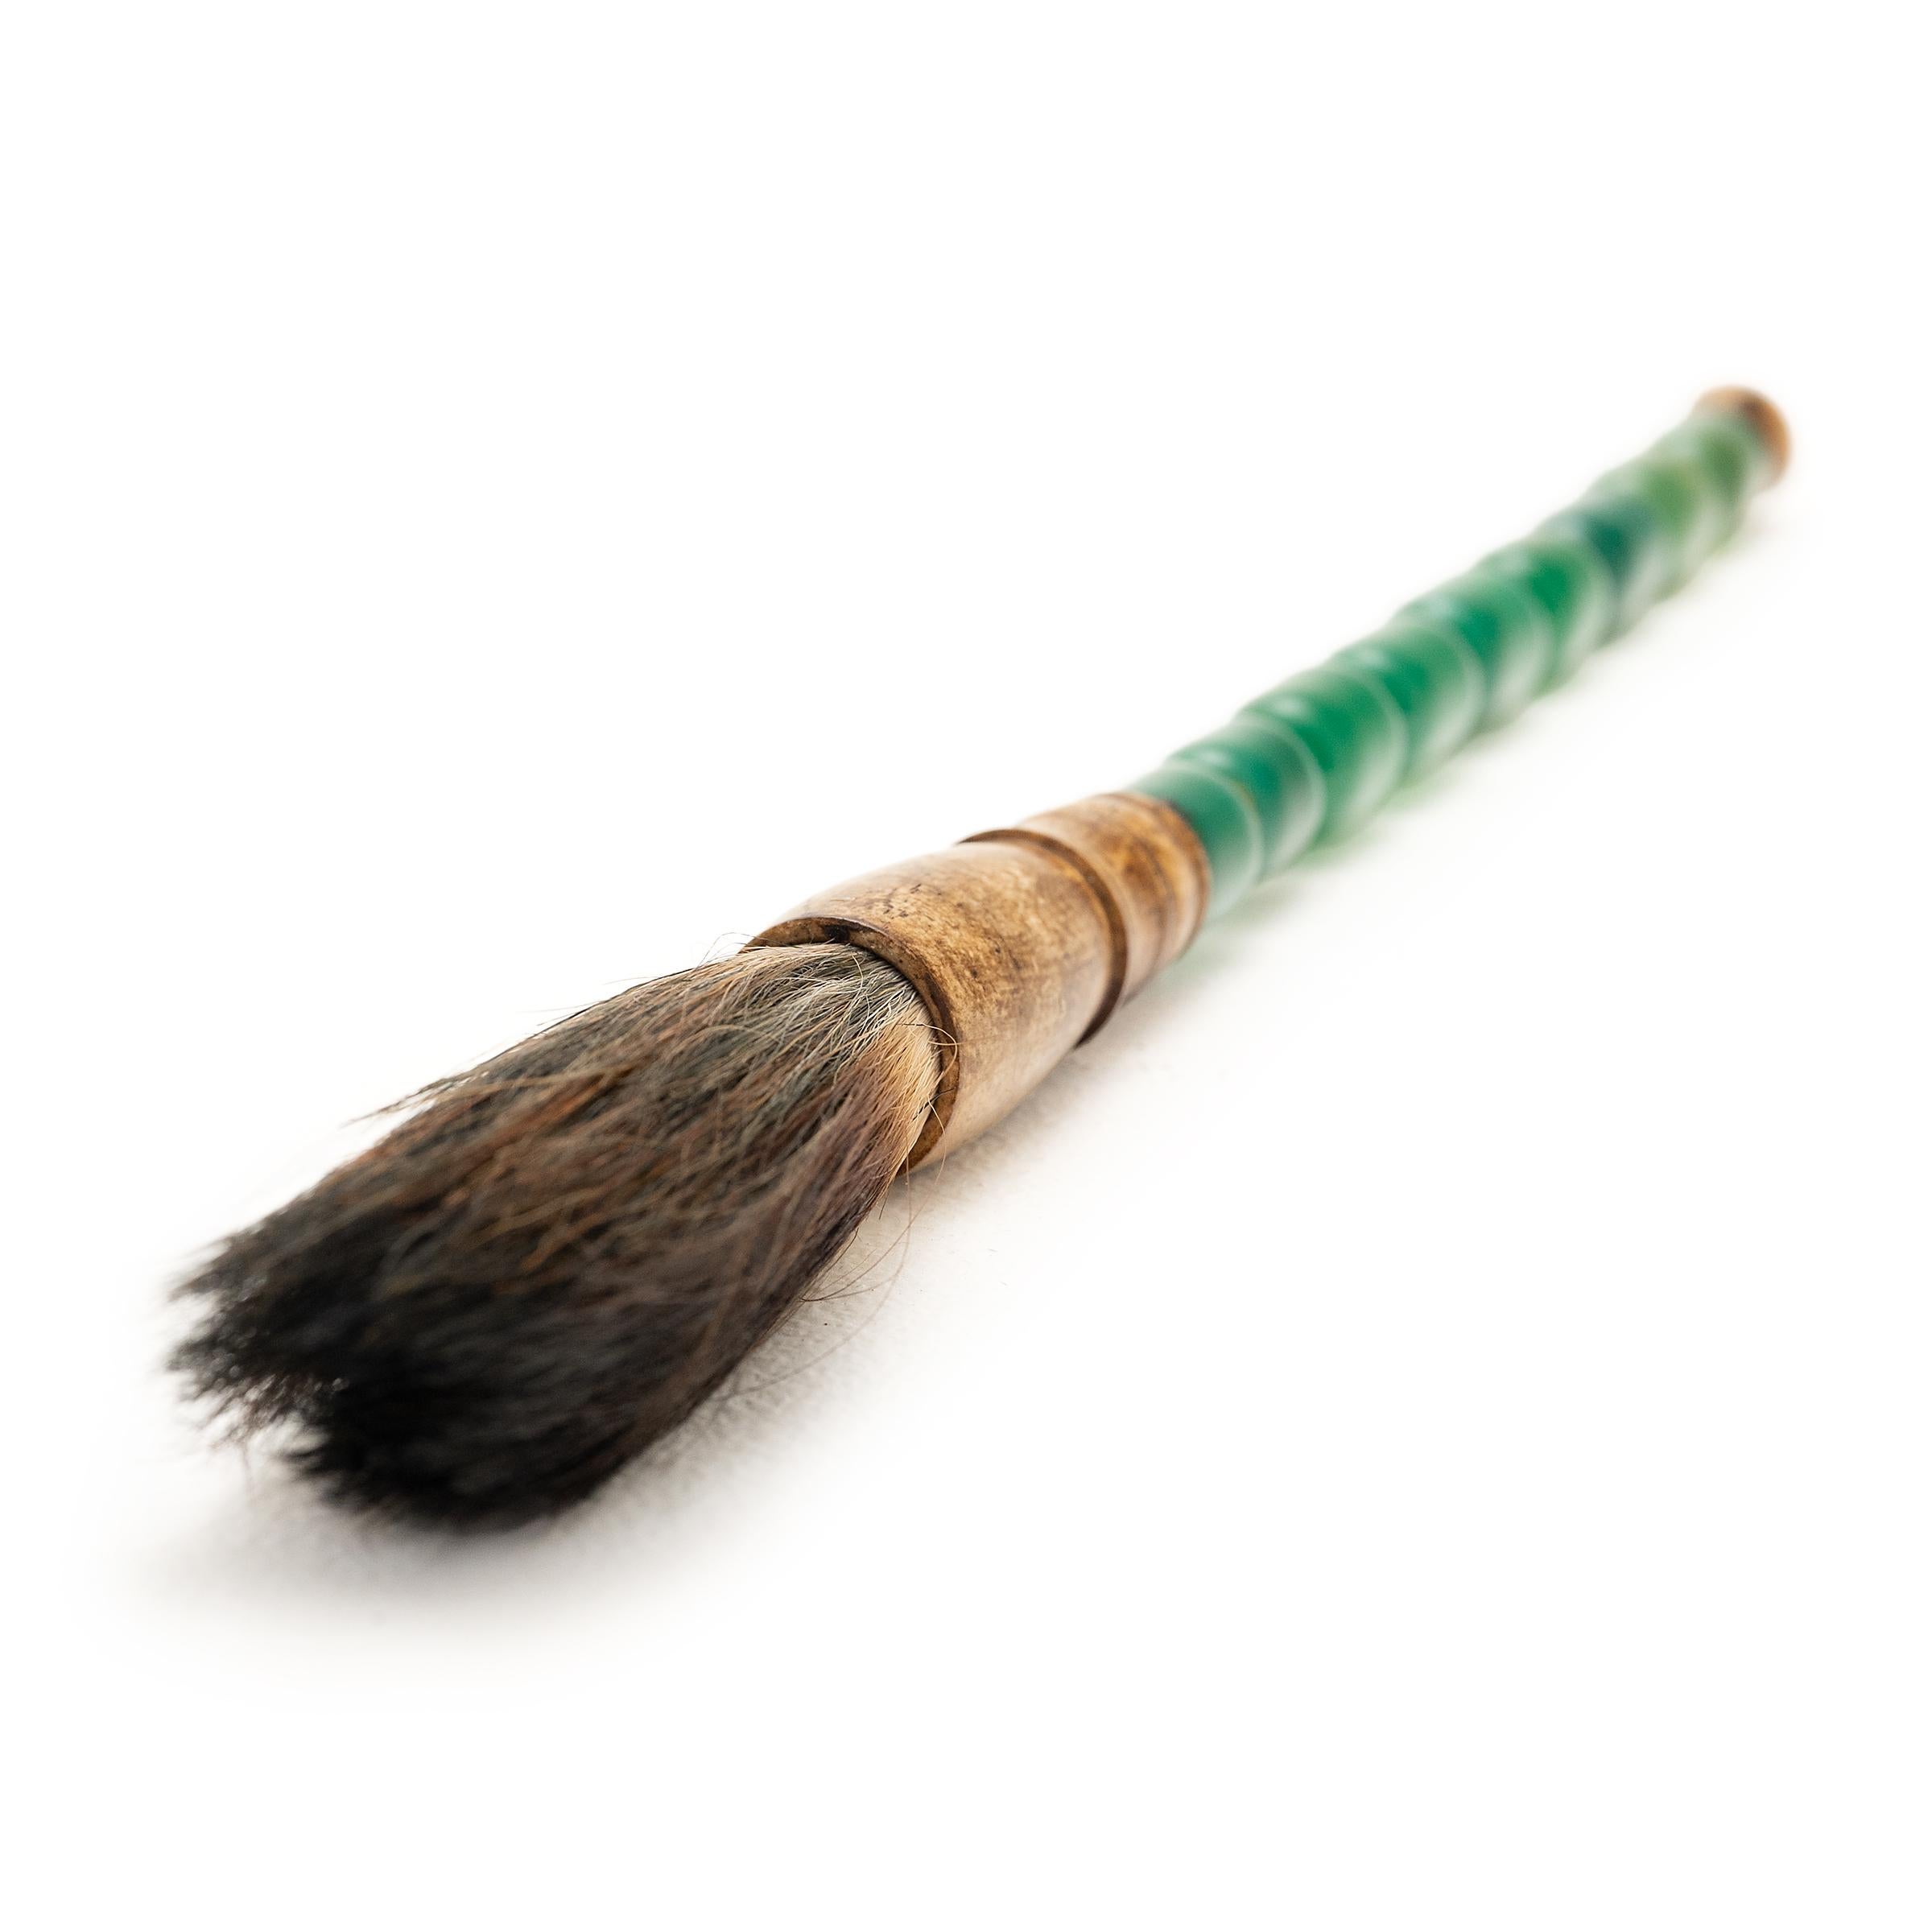 Along with paper, ink, and inkstone, the brush is one of the Four Treasures of the scholar’s studio. Arguably the most important tool, the brush served as a direct link to the artist’s creative spirit. Polished stacked stone beads in a shade of